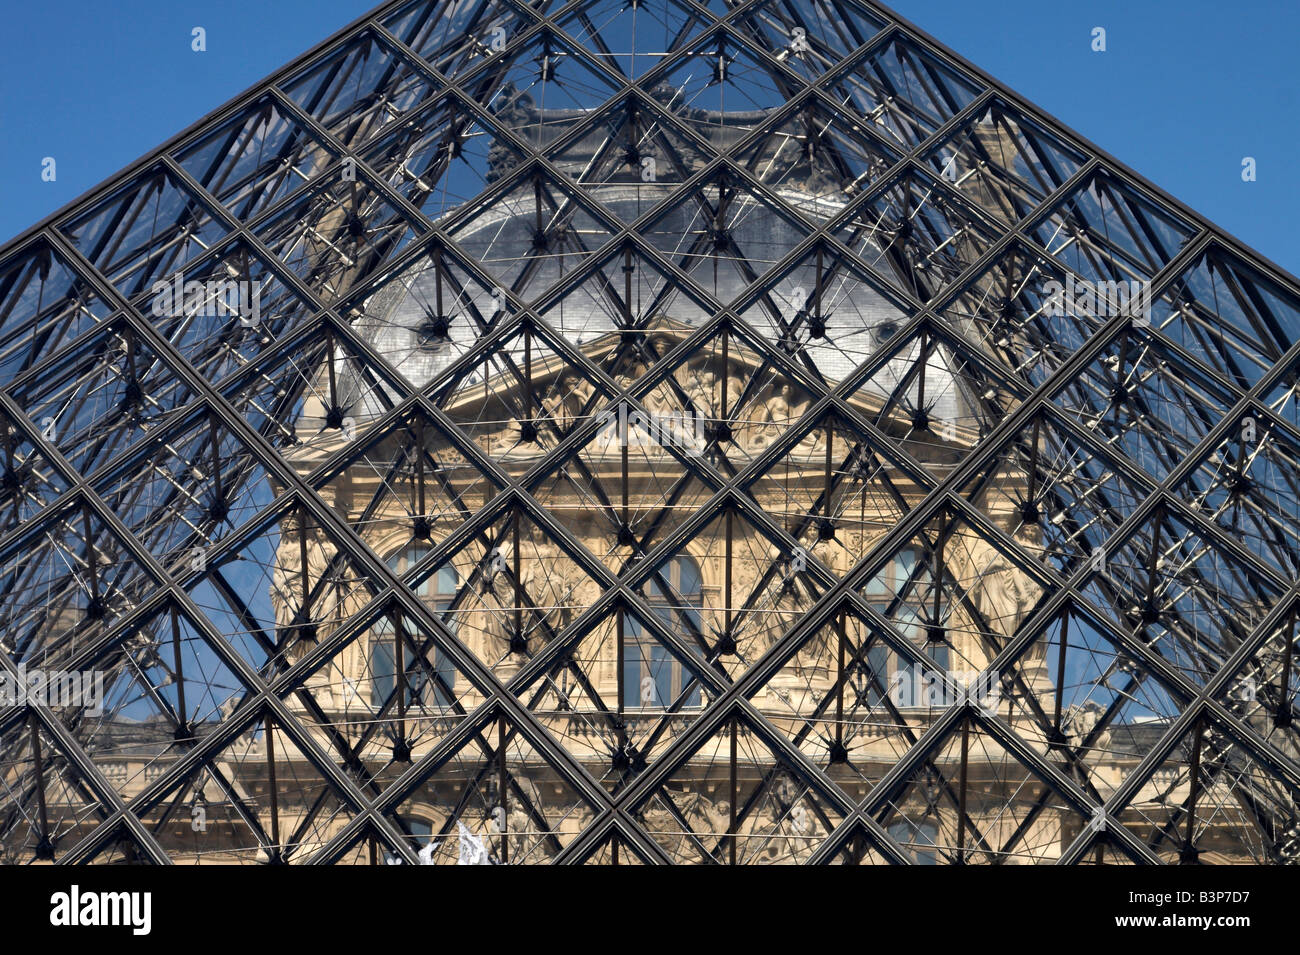 The Louvre museum and glass pyramid in Paris, France Stock Photo